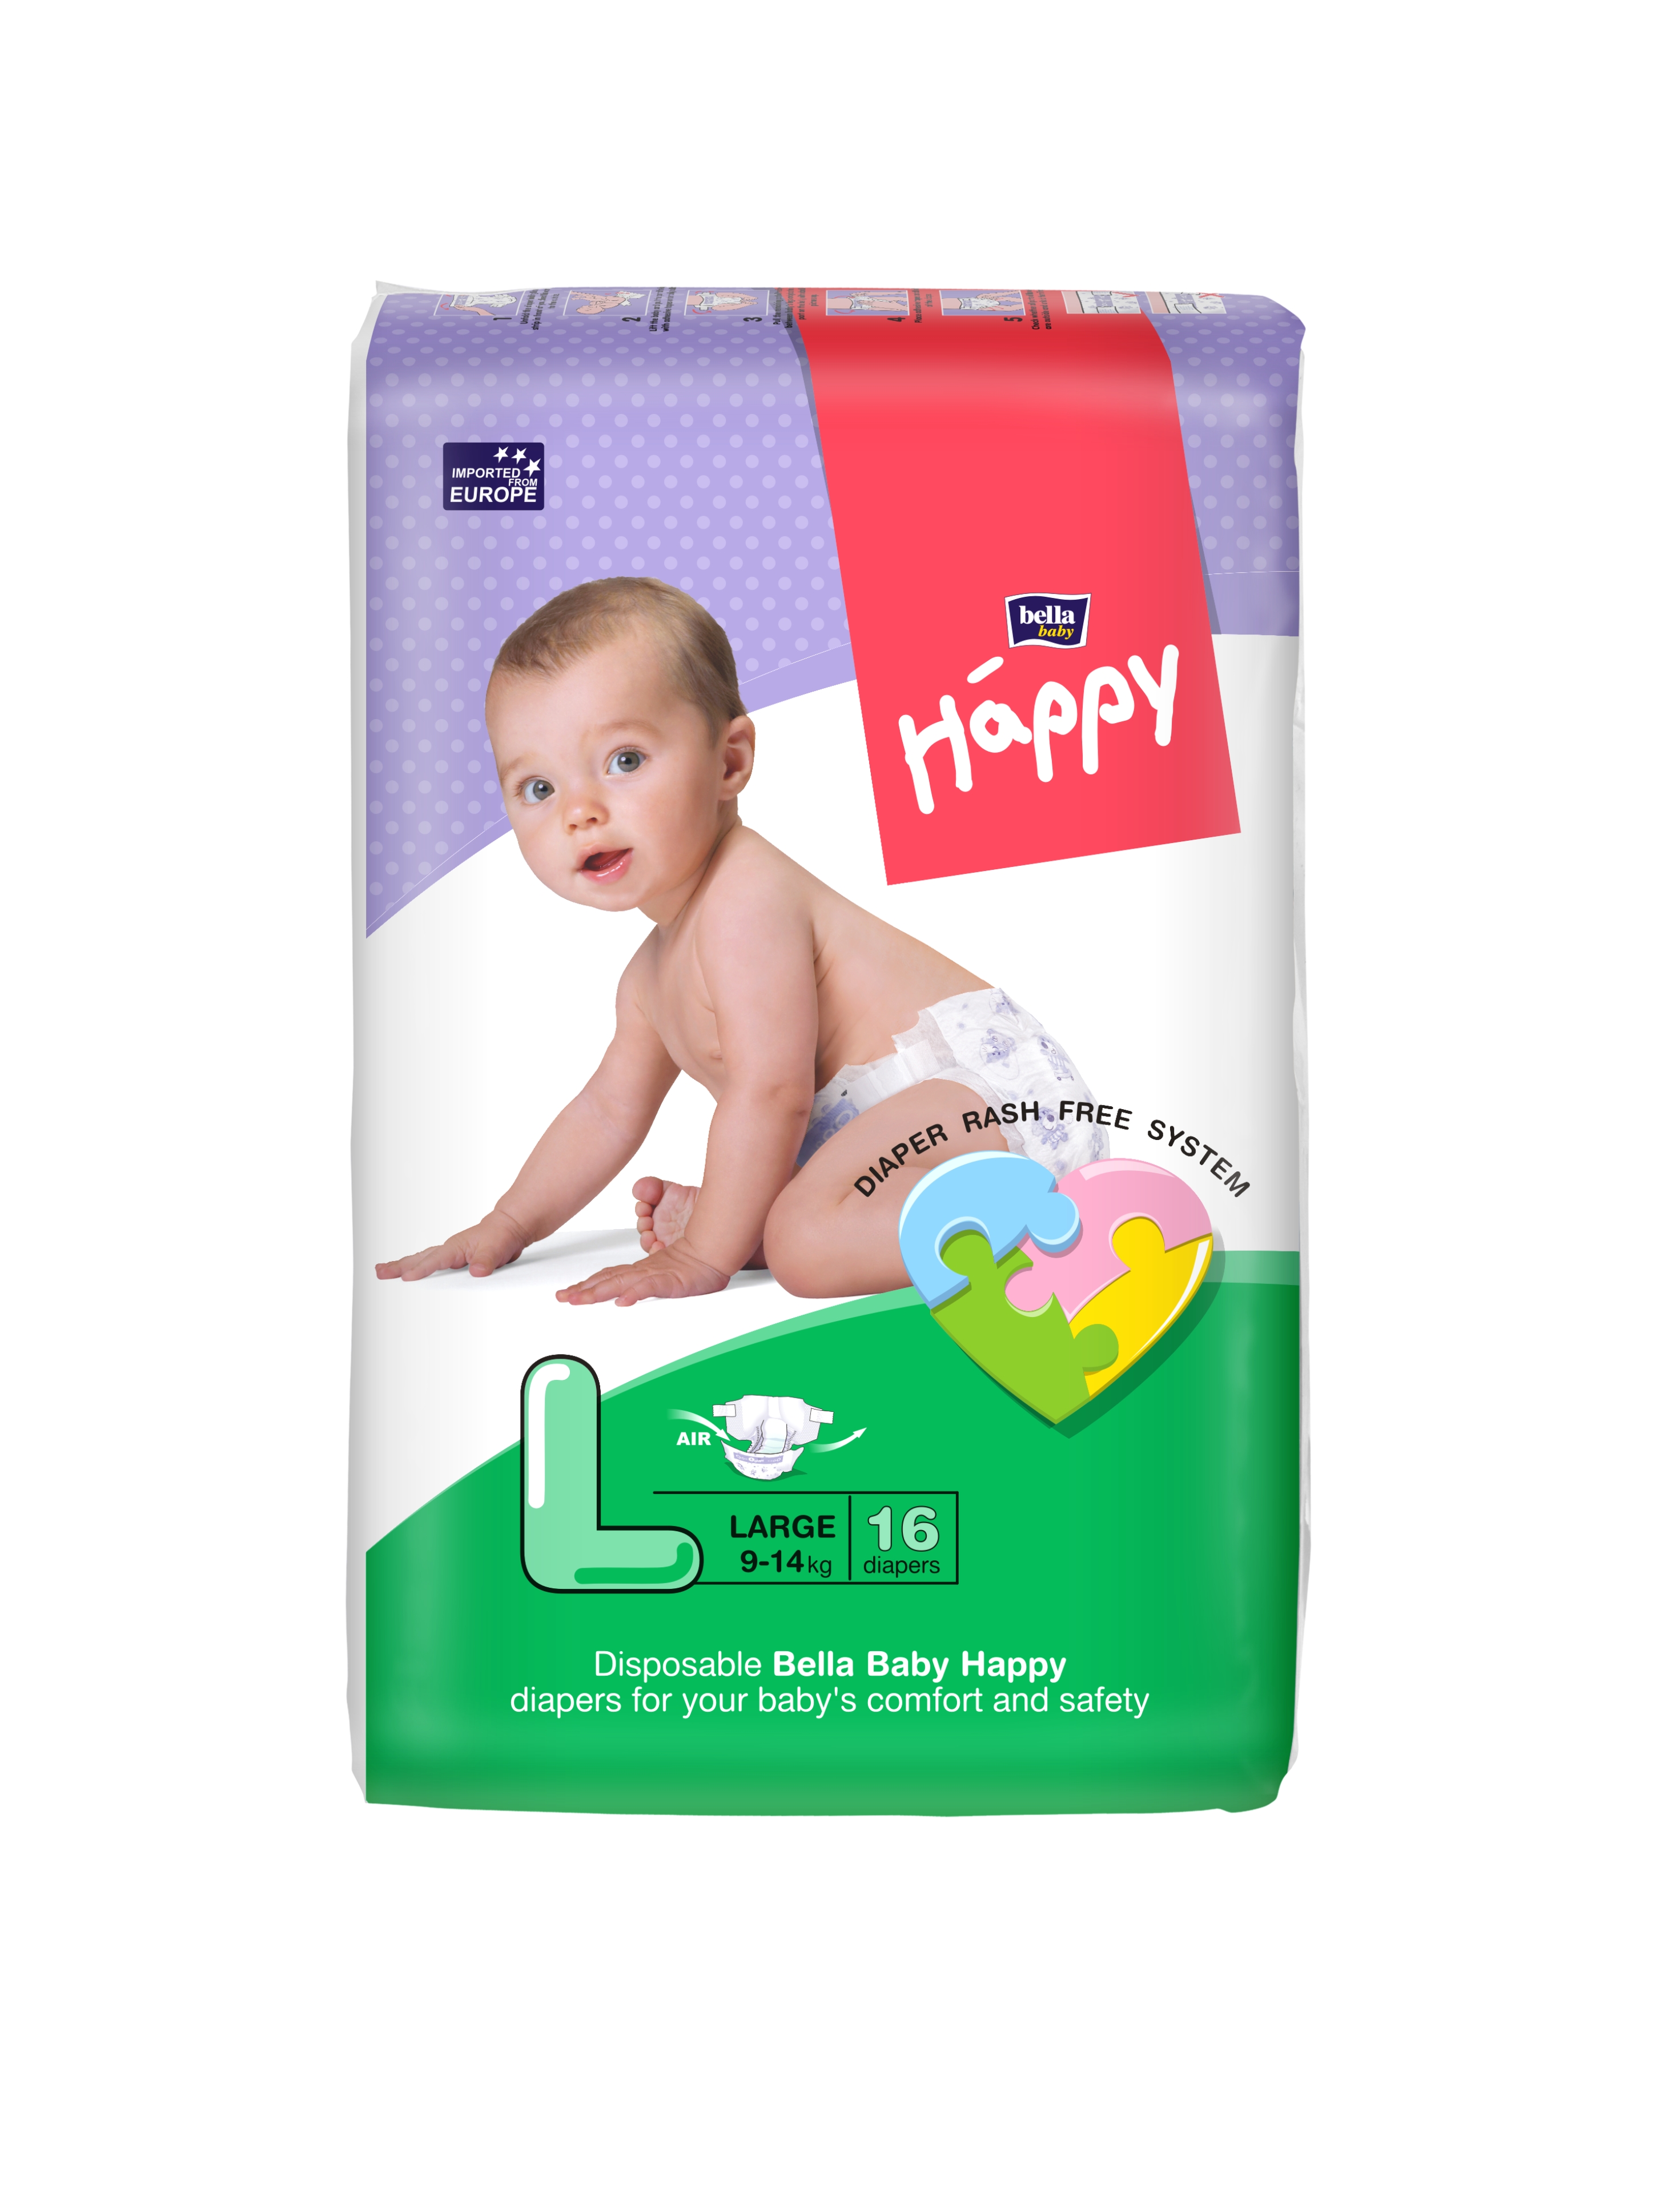 Buy BELLA BABY HAPPY DIAPERS LARGE 16 PCS at Best Price Online